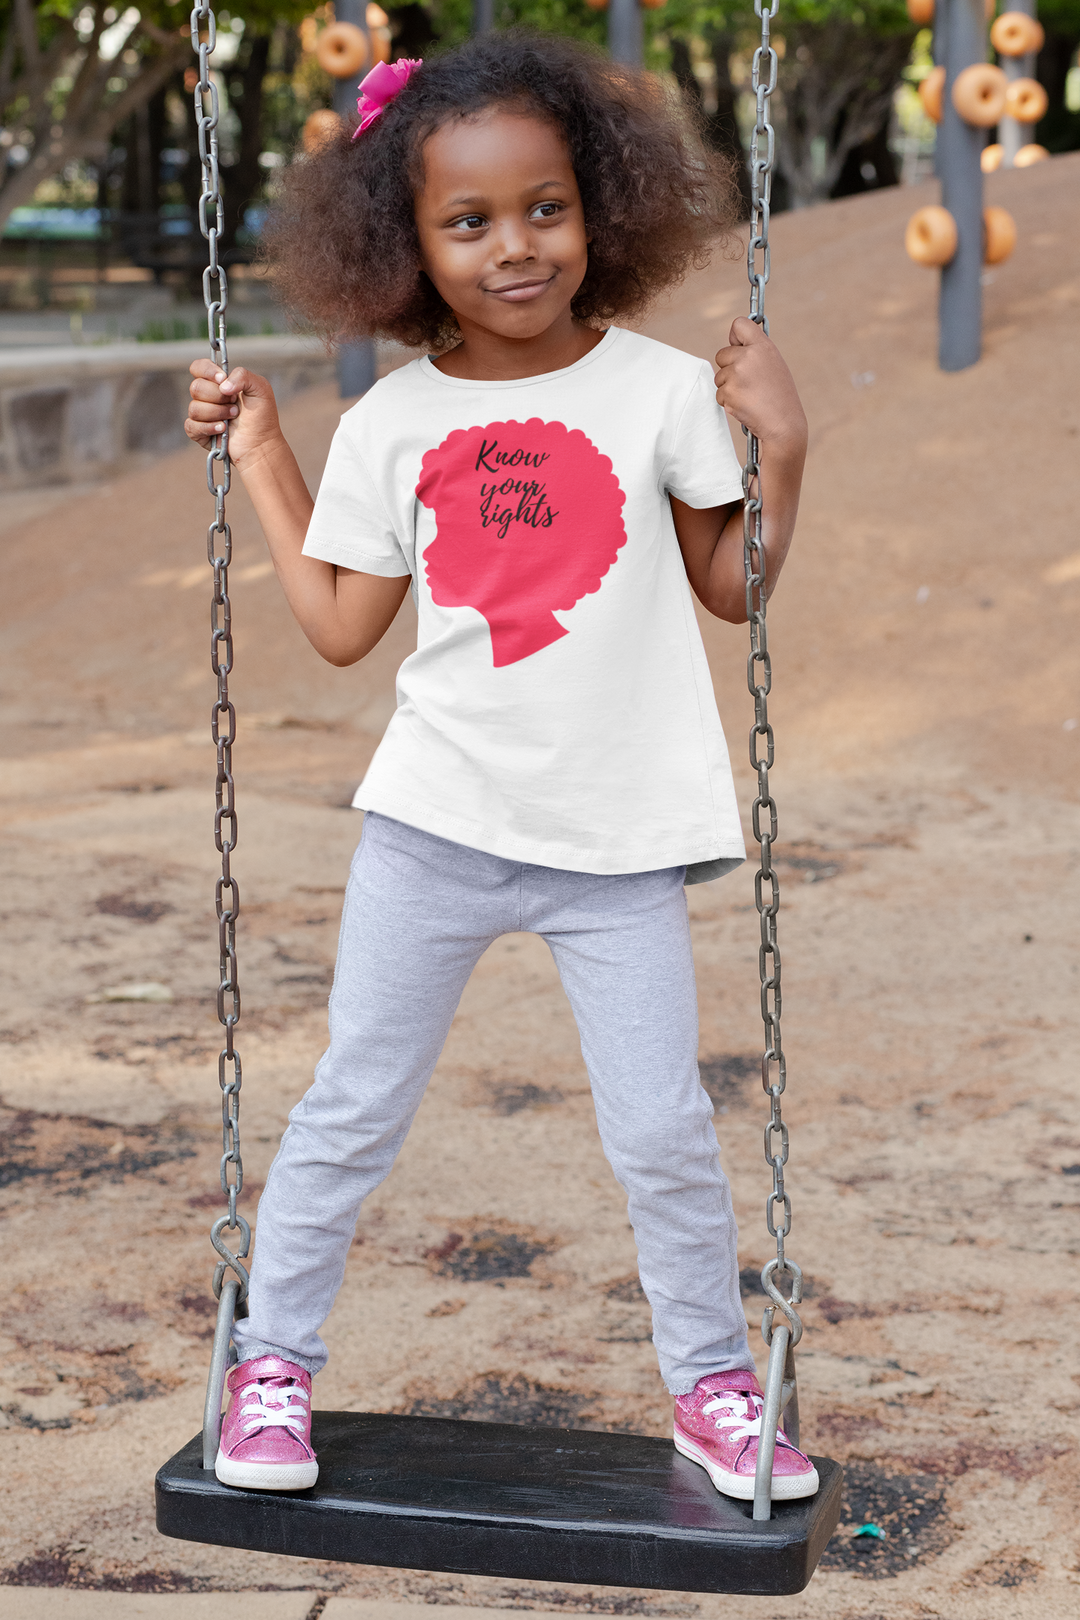 Know your rights. Girl power t-shirts for Toddlers and Kids.